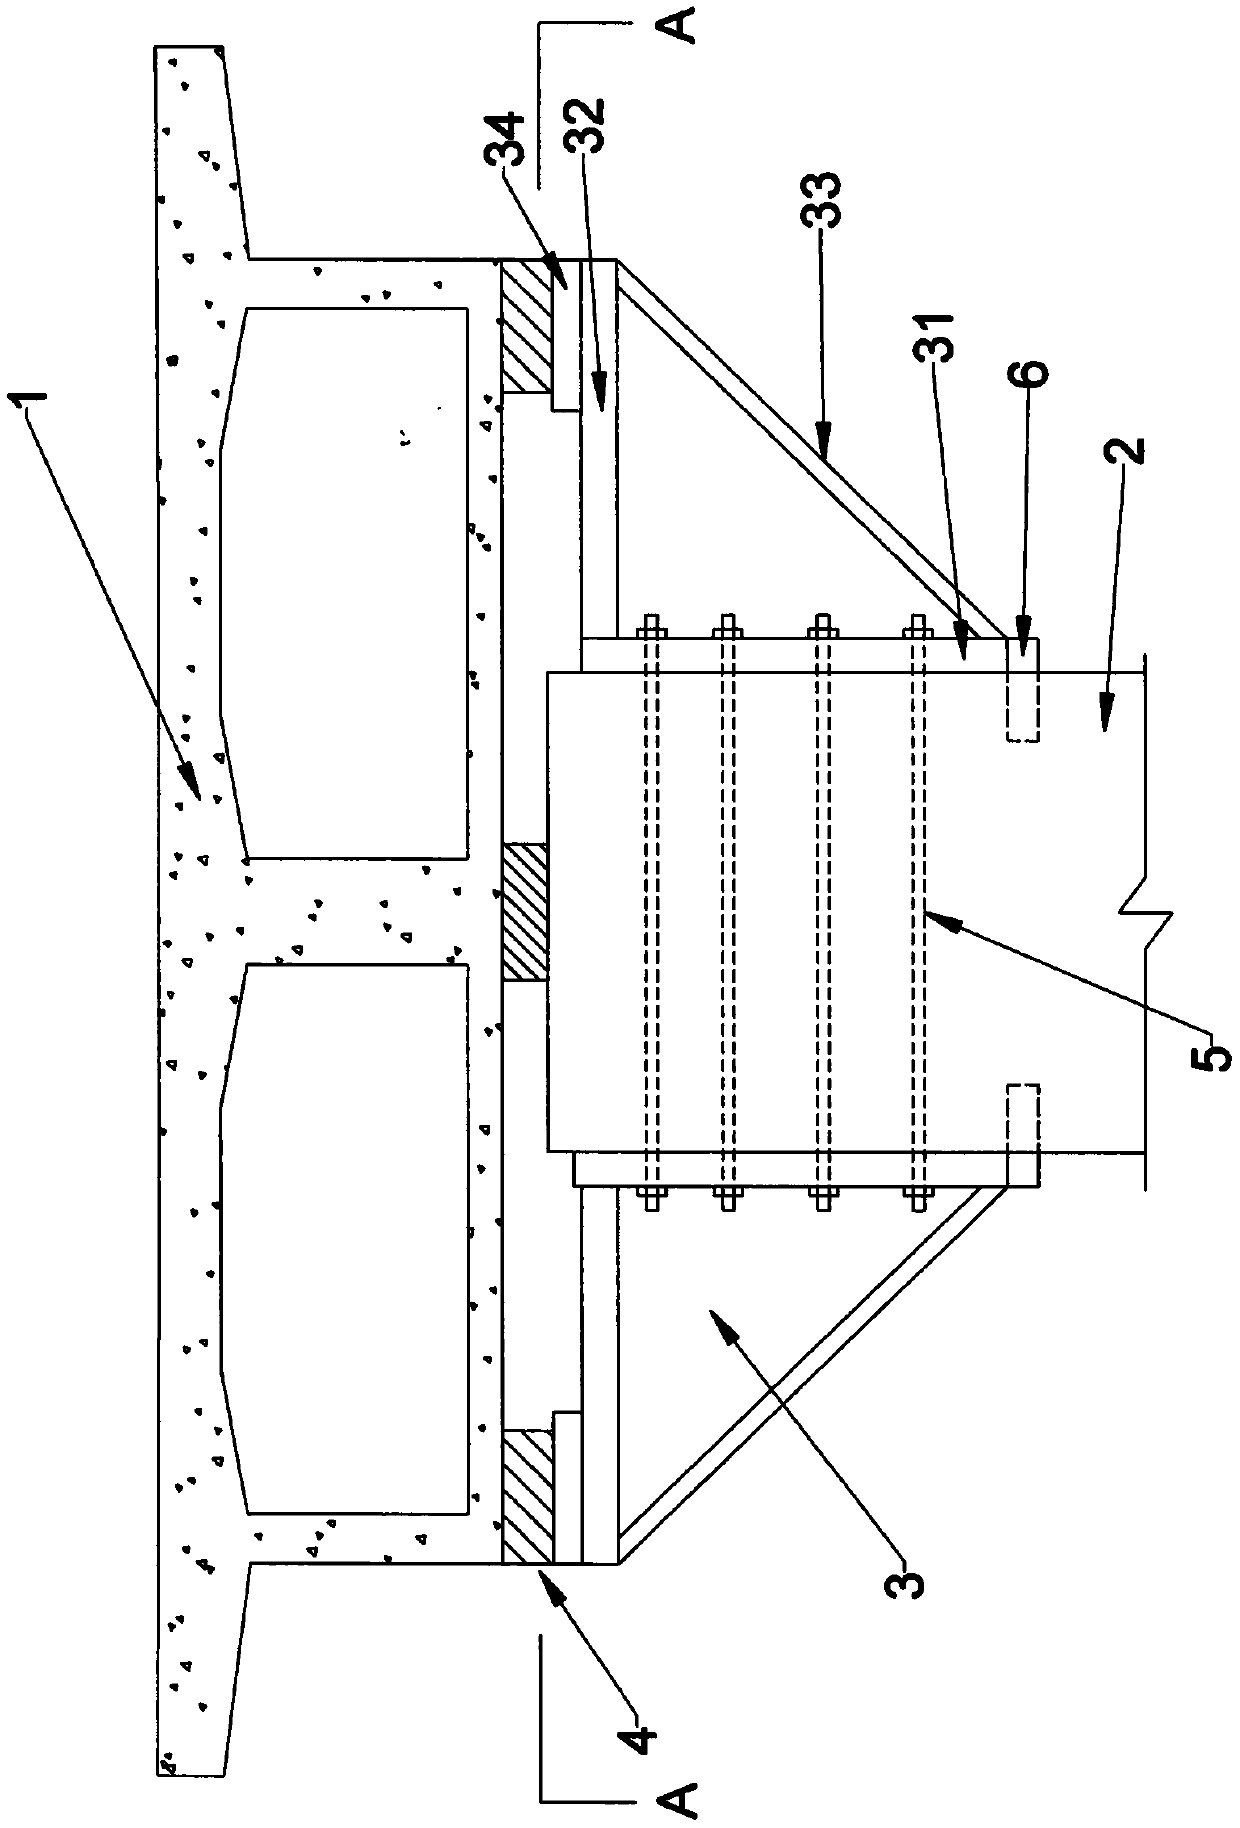 Built-in stable support reinforced single-pier bridge structure